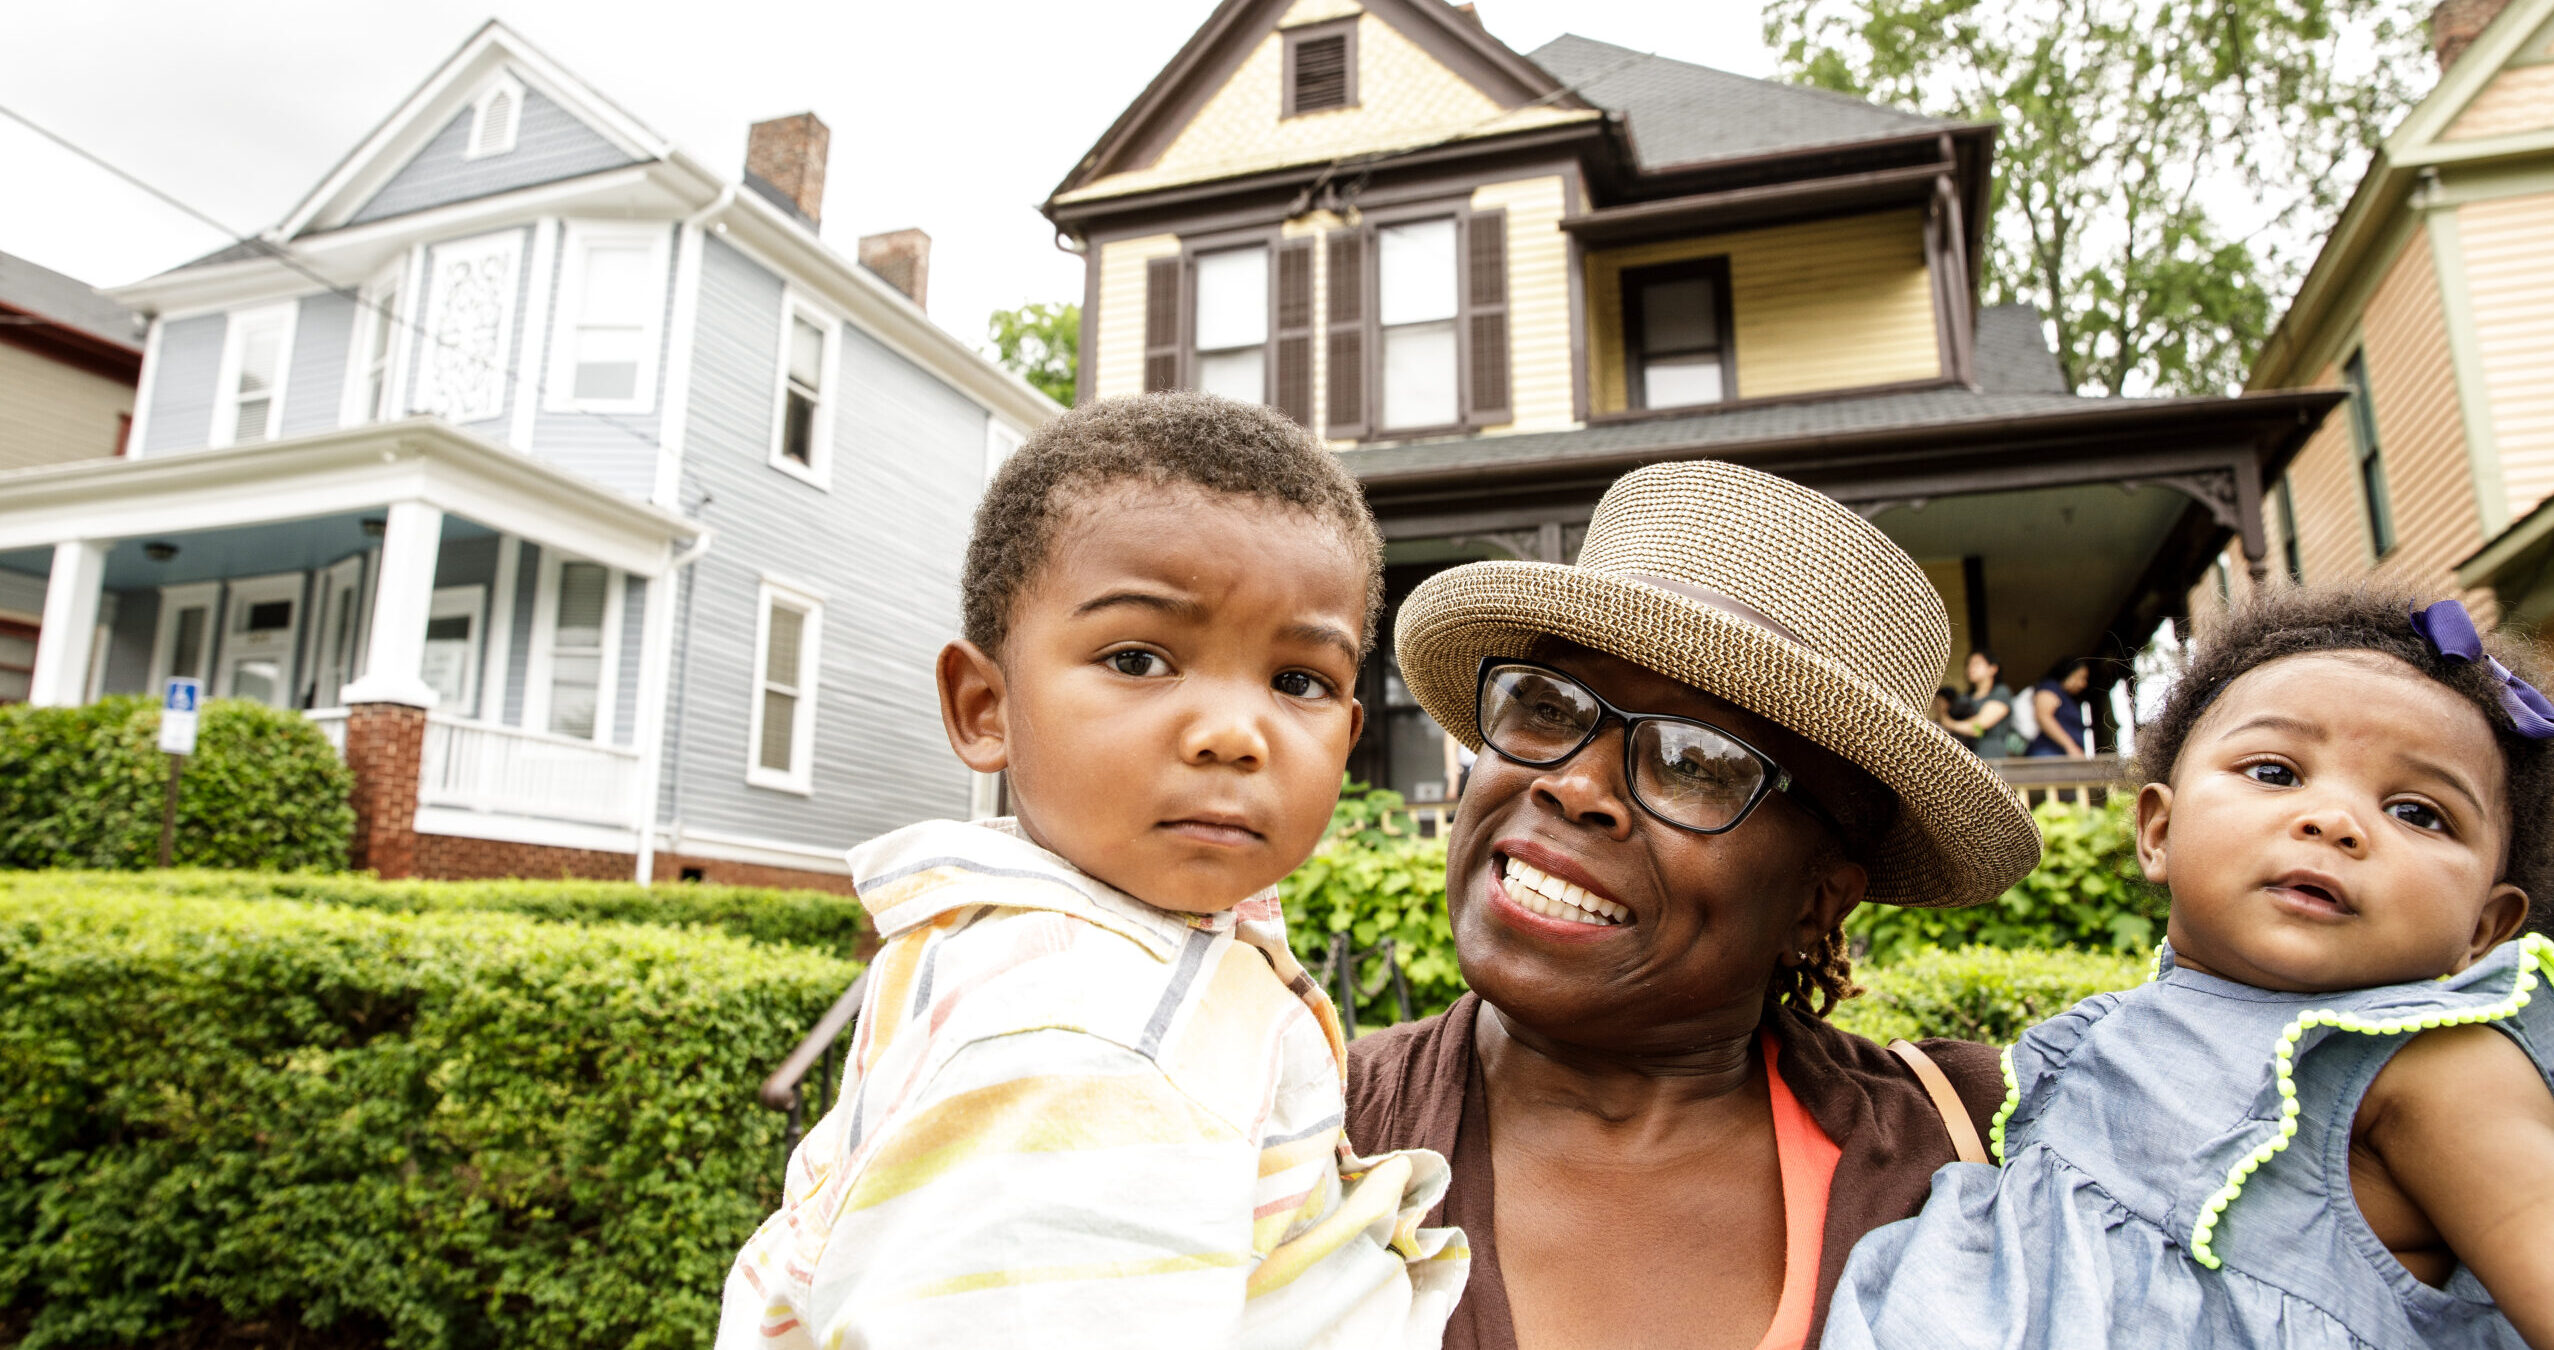 An african-american woman holding two children in front of a house.